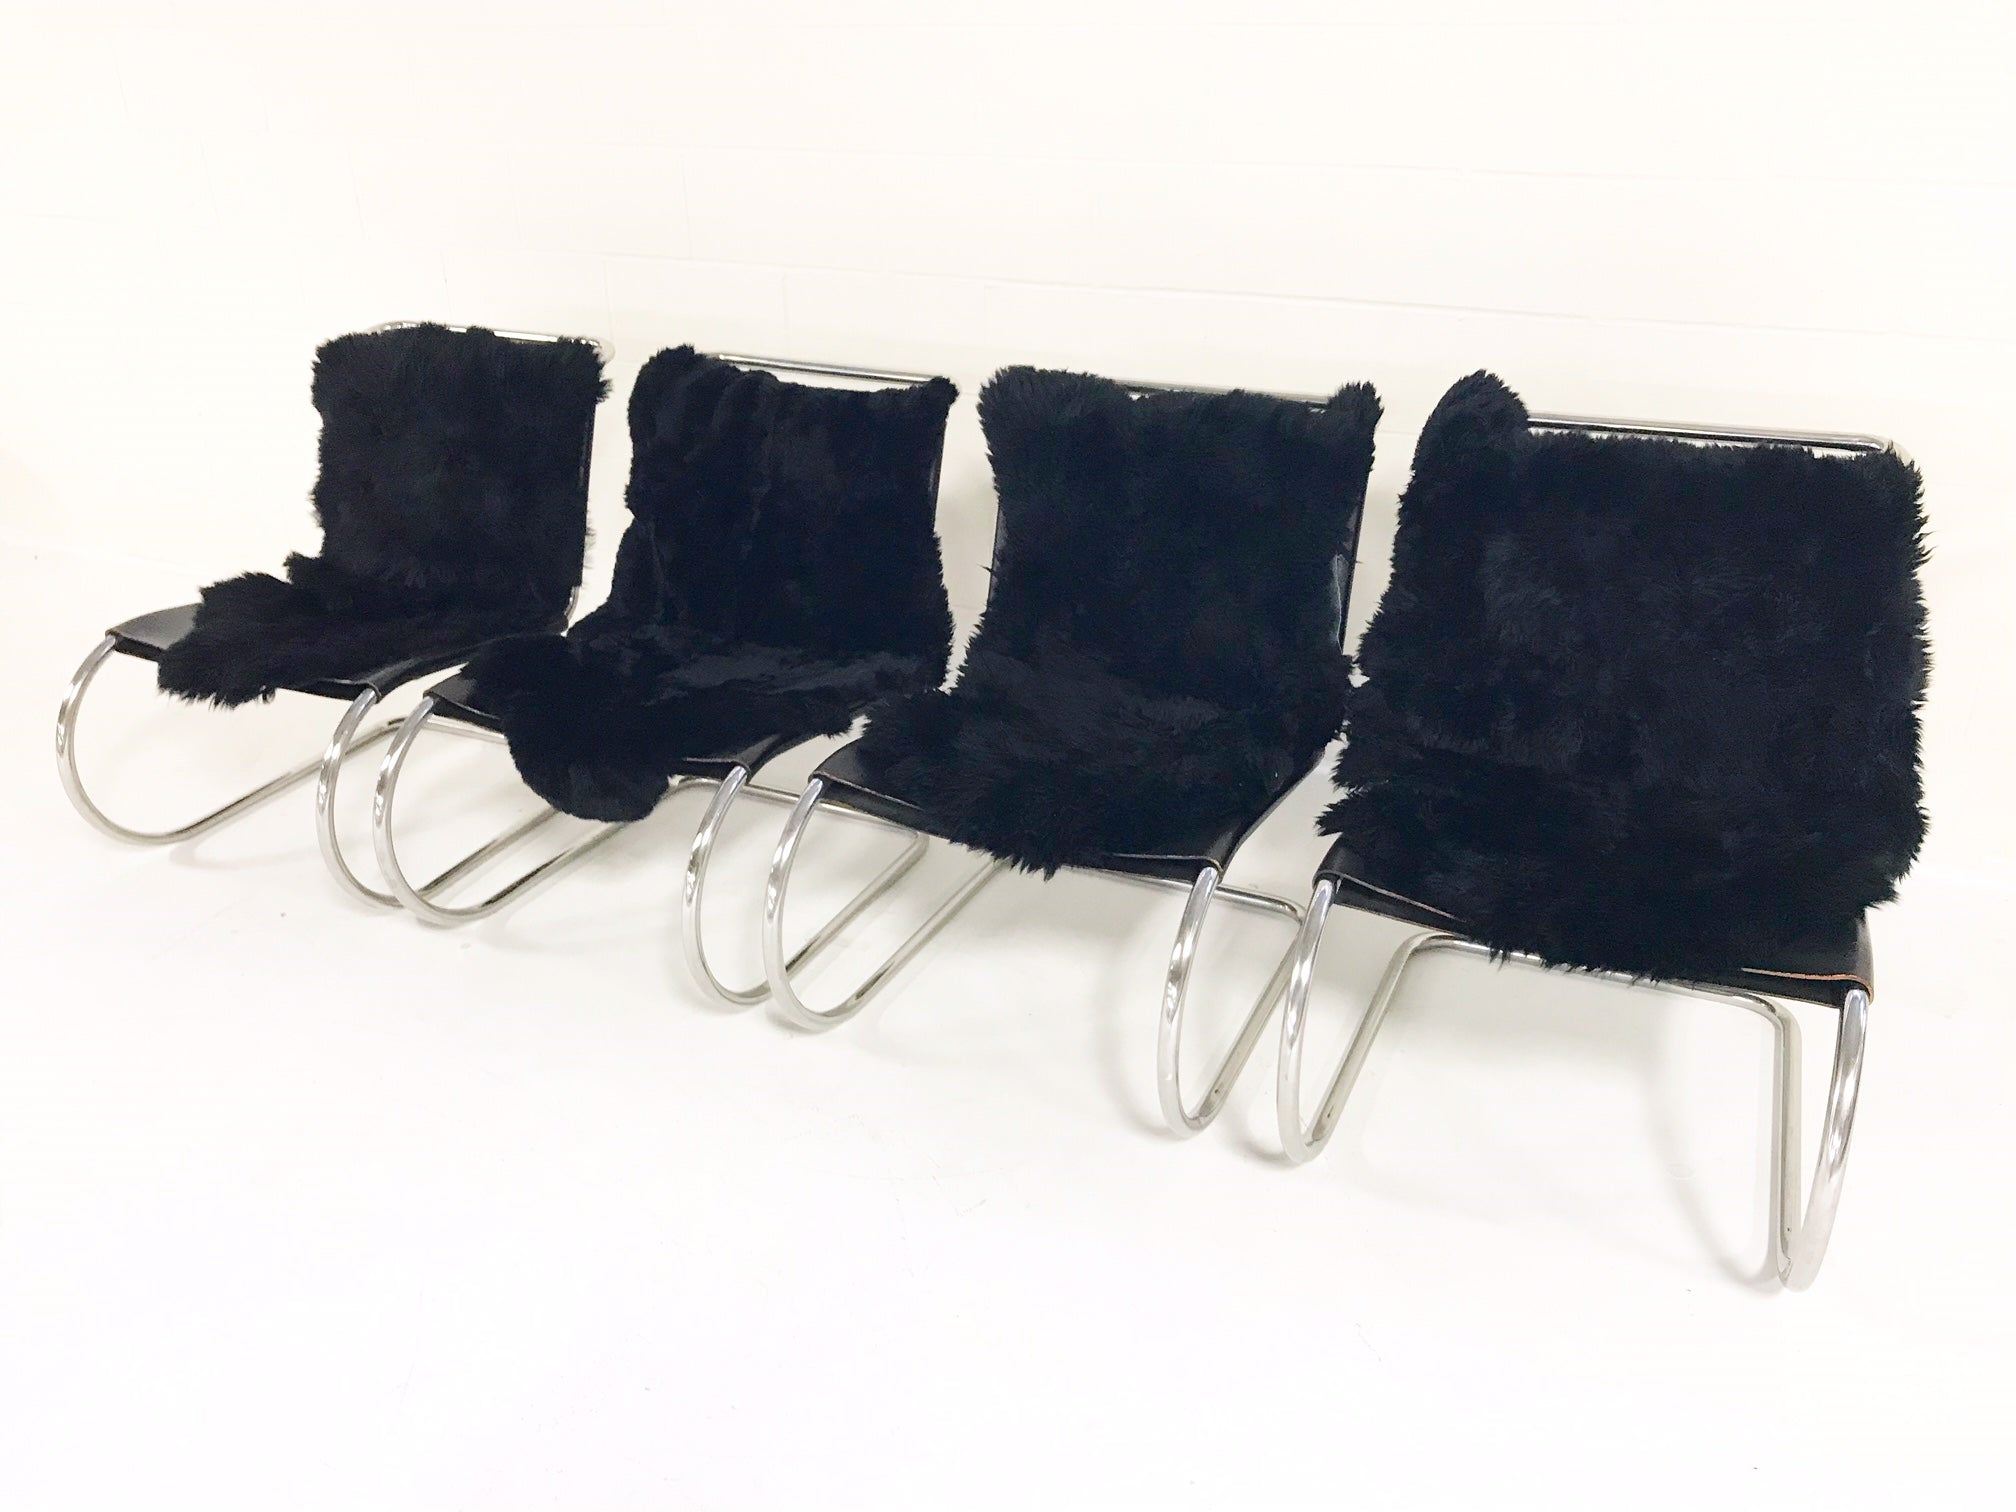 MR Chairs with Brazilian Sheepskins, set of 4 - FORSYTH